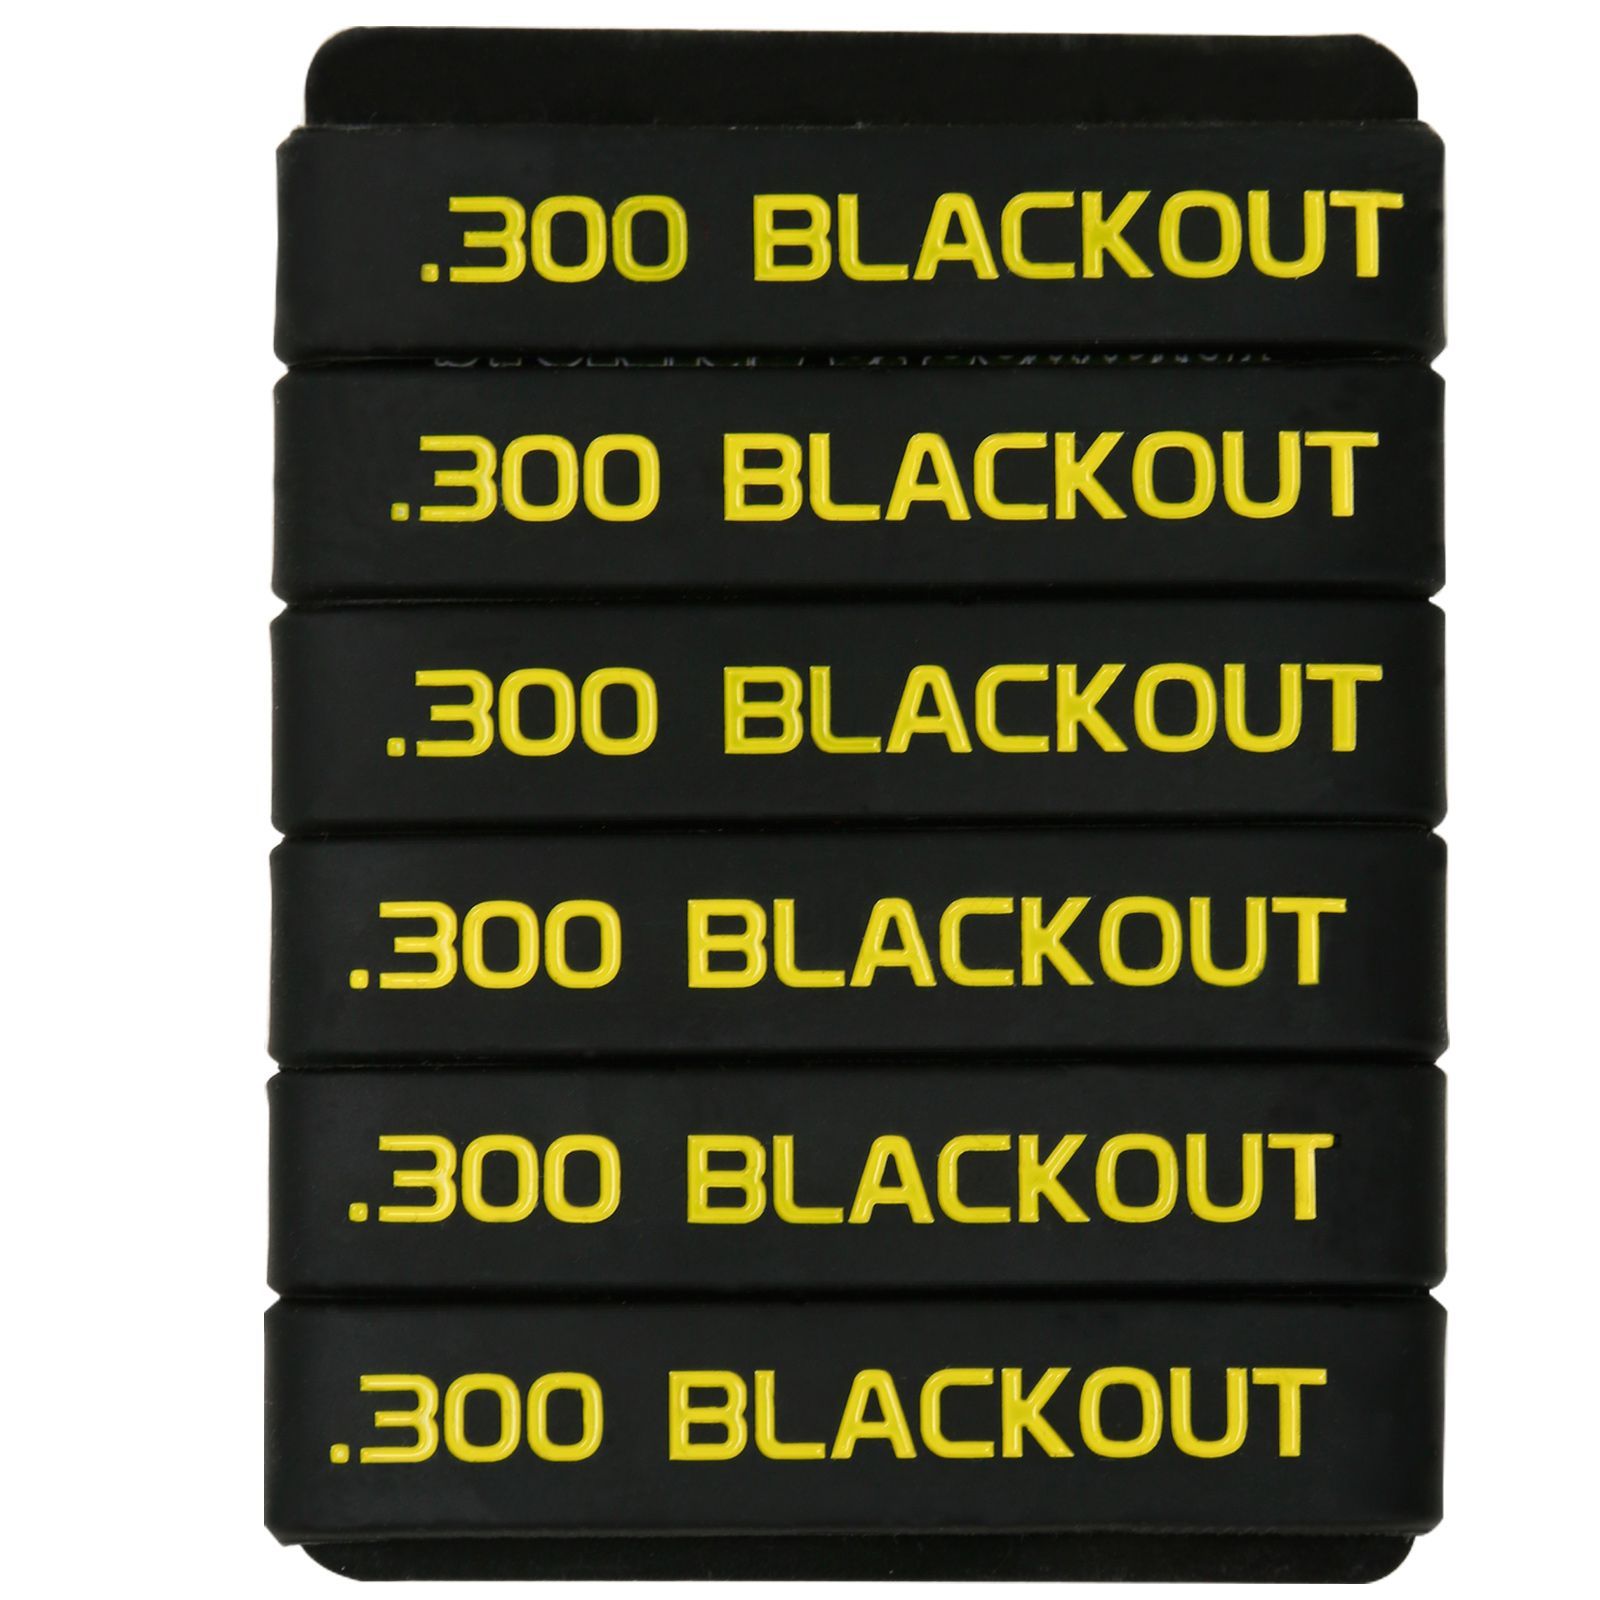 300 blackout stickers